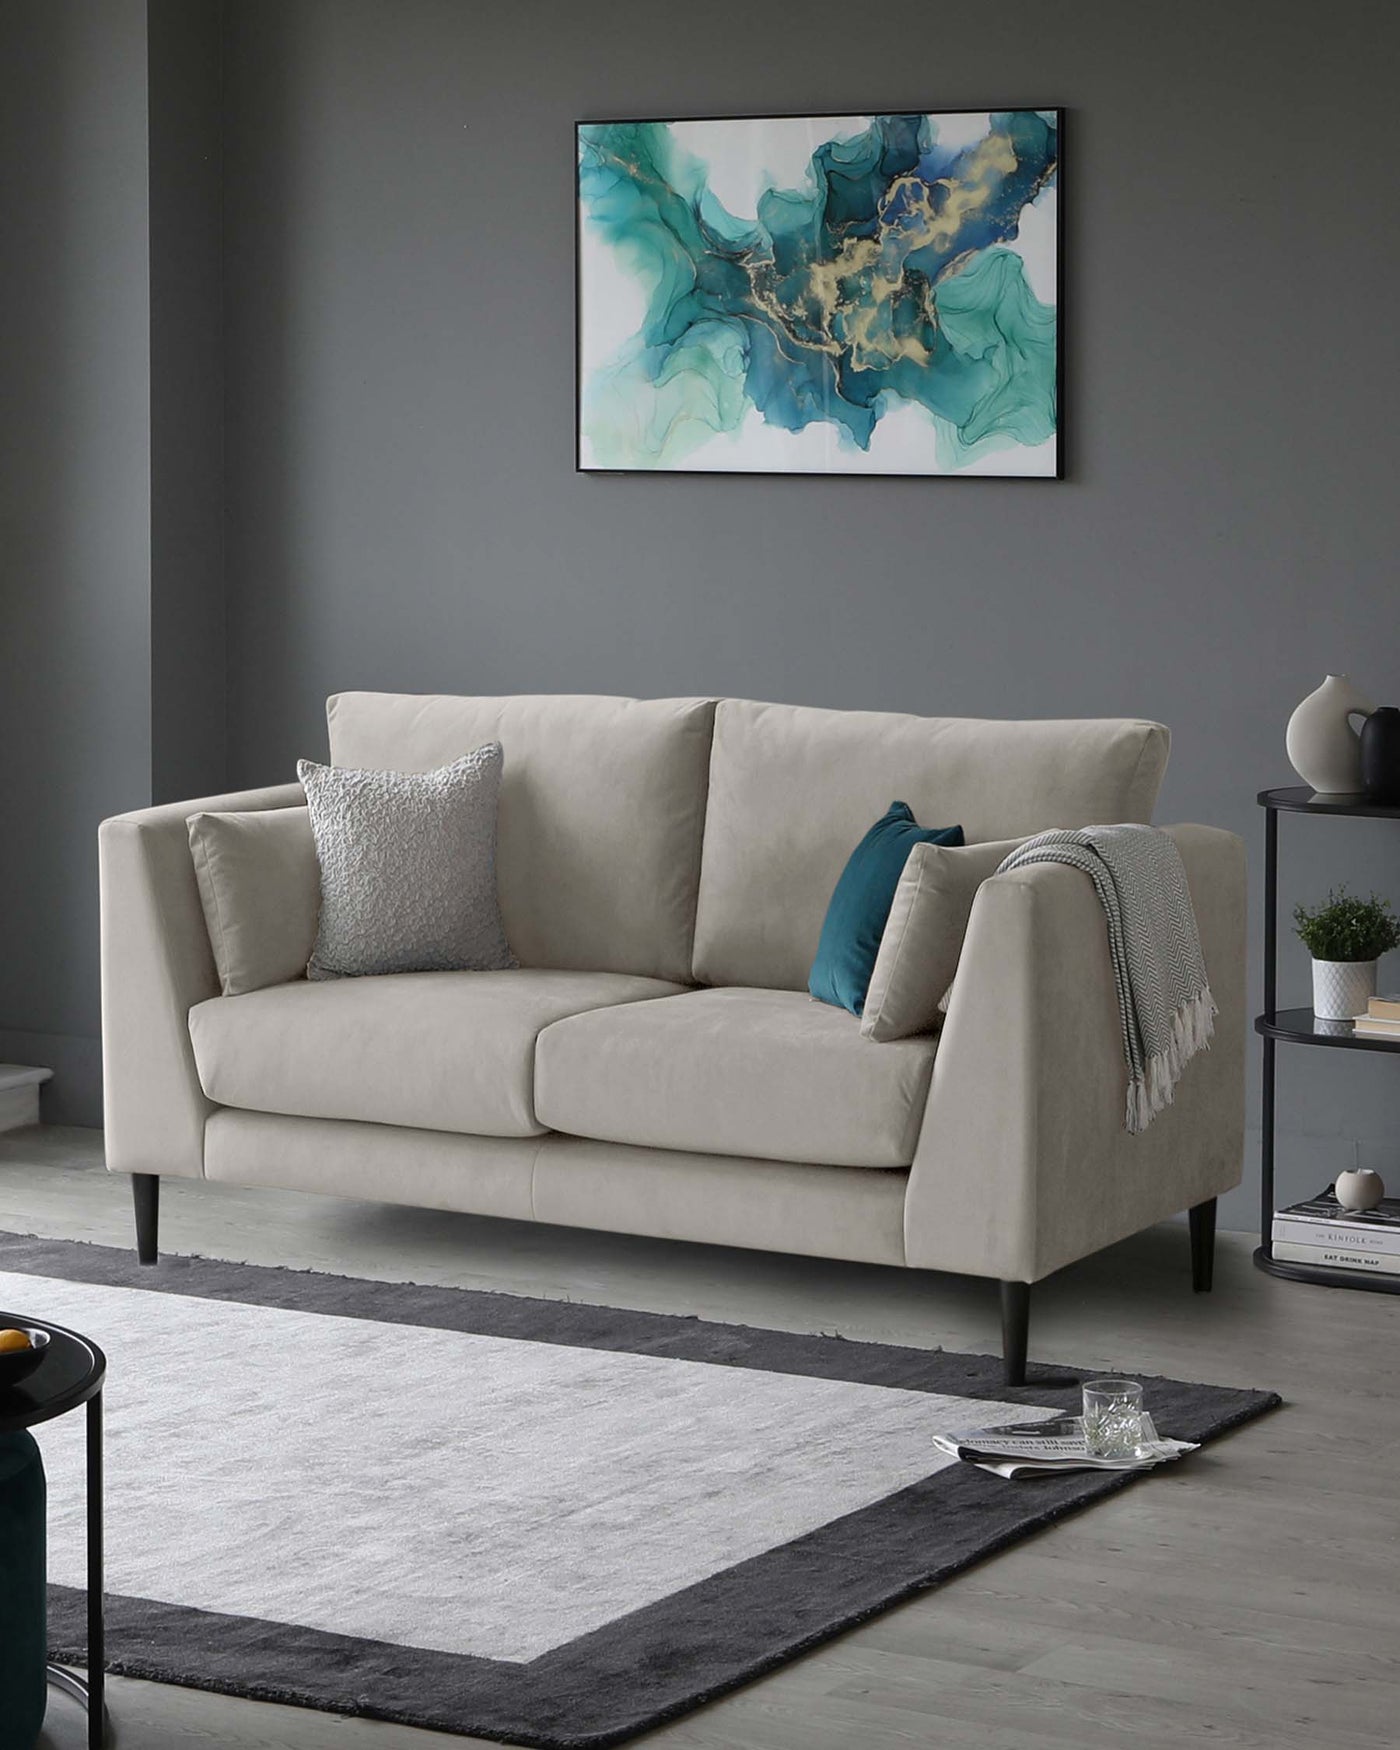 Elegant and modern three-seater sofa with a neutral light beige upholstery and minimalist design, featuring clean lines and tapered dark wooden legs. Decorated with complementing throw pillows in silver and teal, and accessorized with a cosy light grey throw blanket draped along one armrest. The sofa is set on a contemporary grey area rug with a darker grey border, creating a sophisticated and inviting look within a minimalist living space.